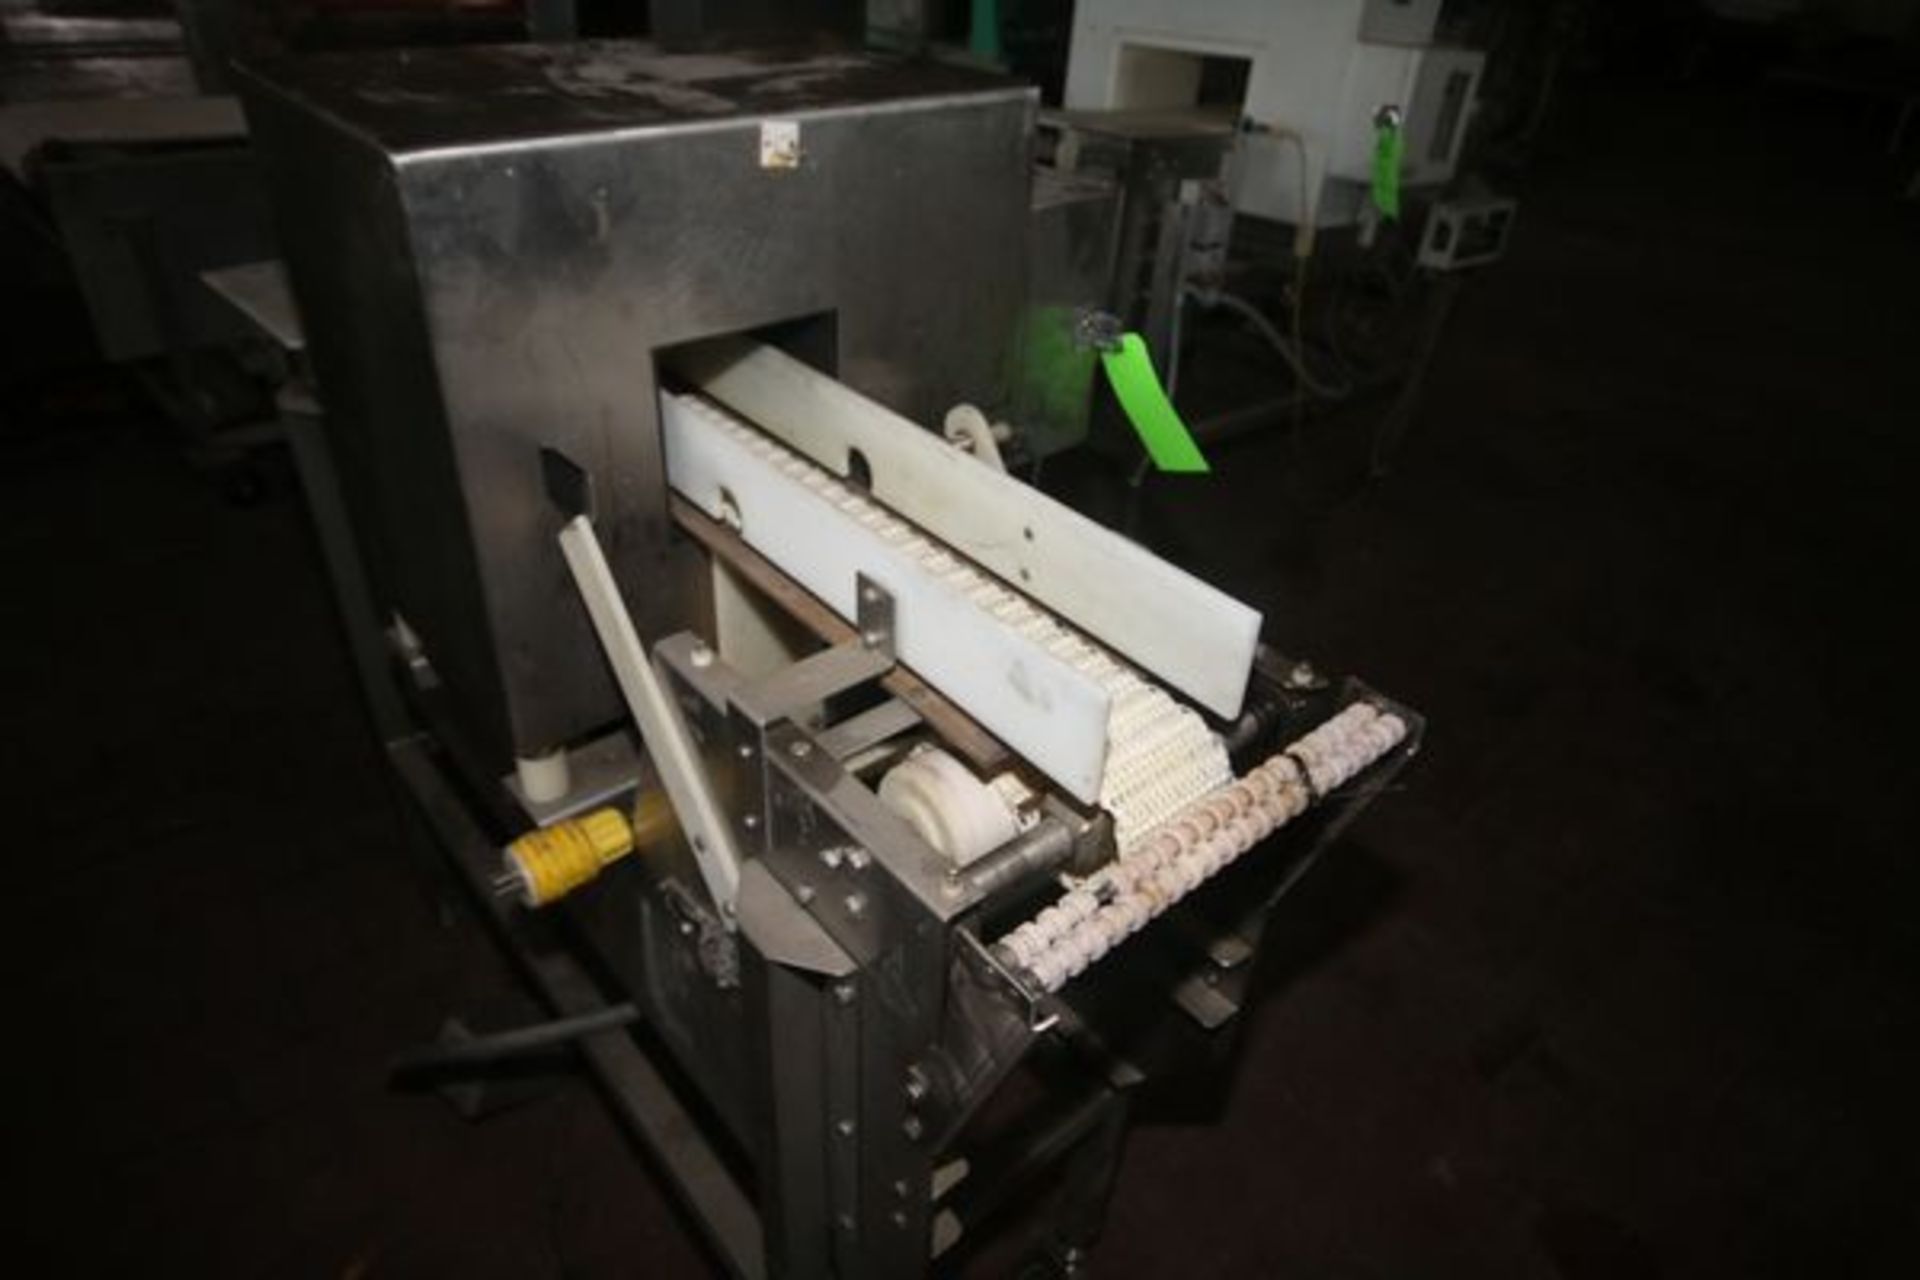 Goring Kerr Metal Detector, 6" Wide x 5" Tall x 13" Deep with 4" Wide Conveyor with Reject - Image 3 of 4